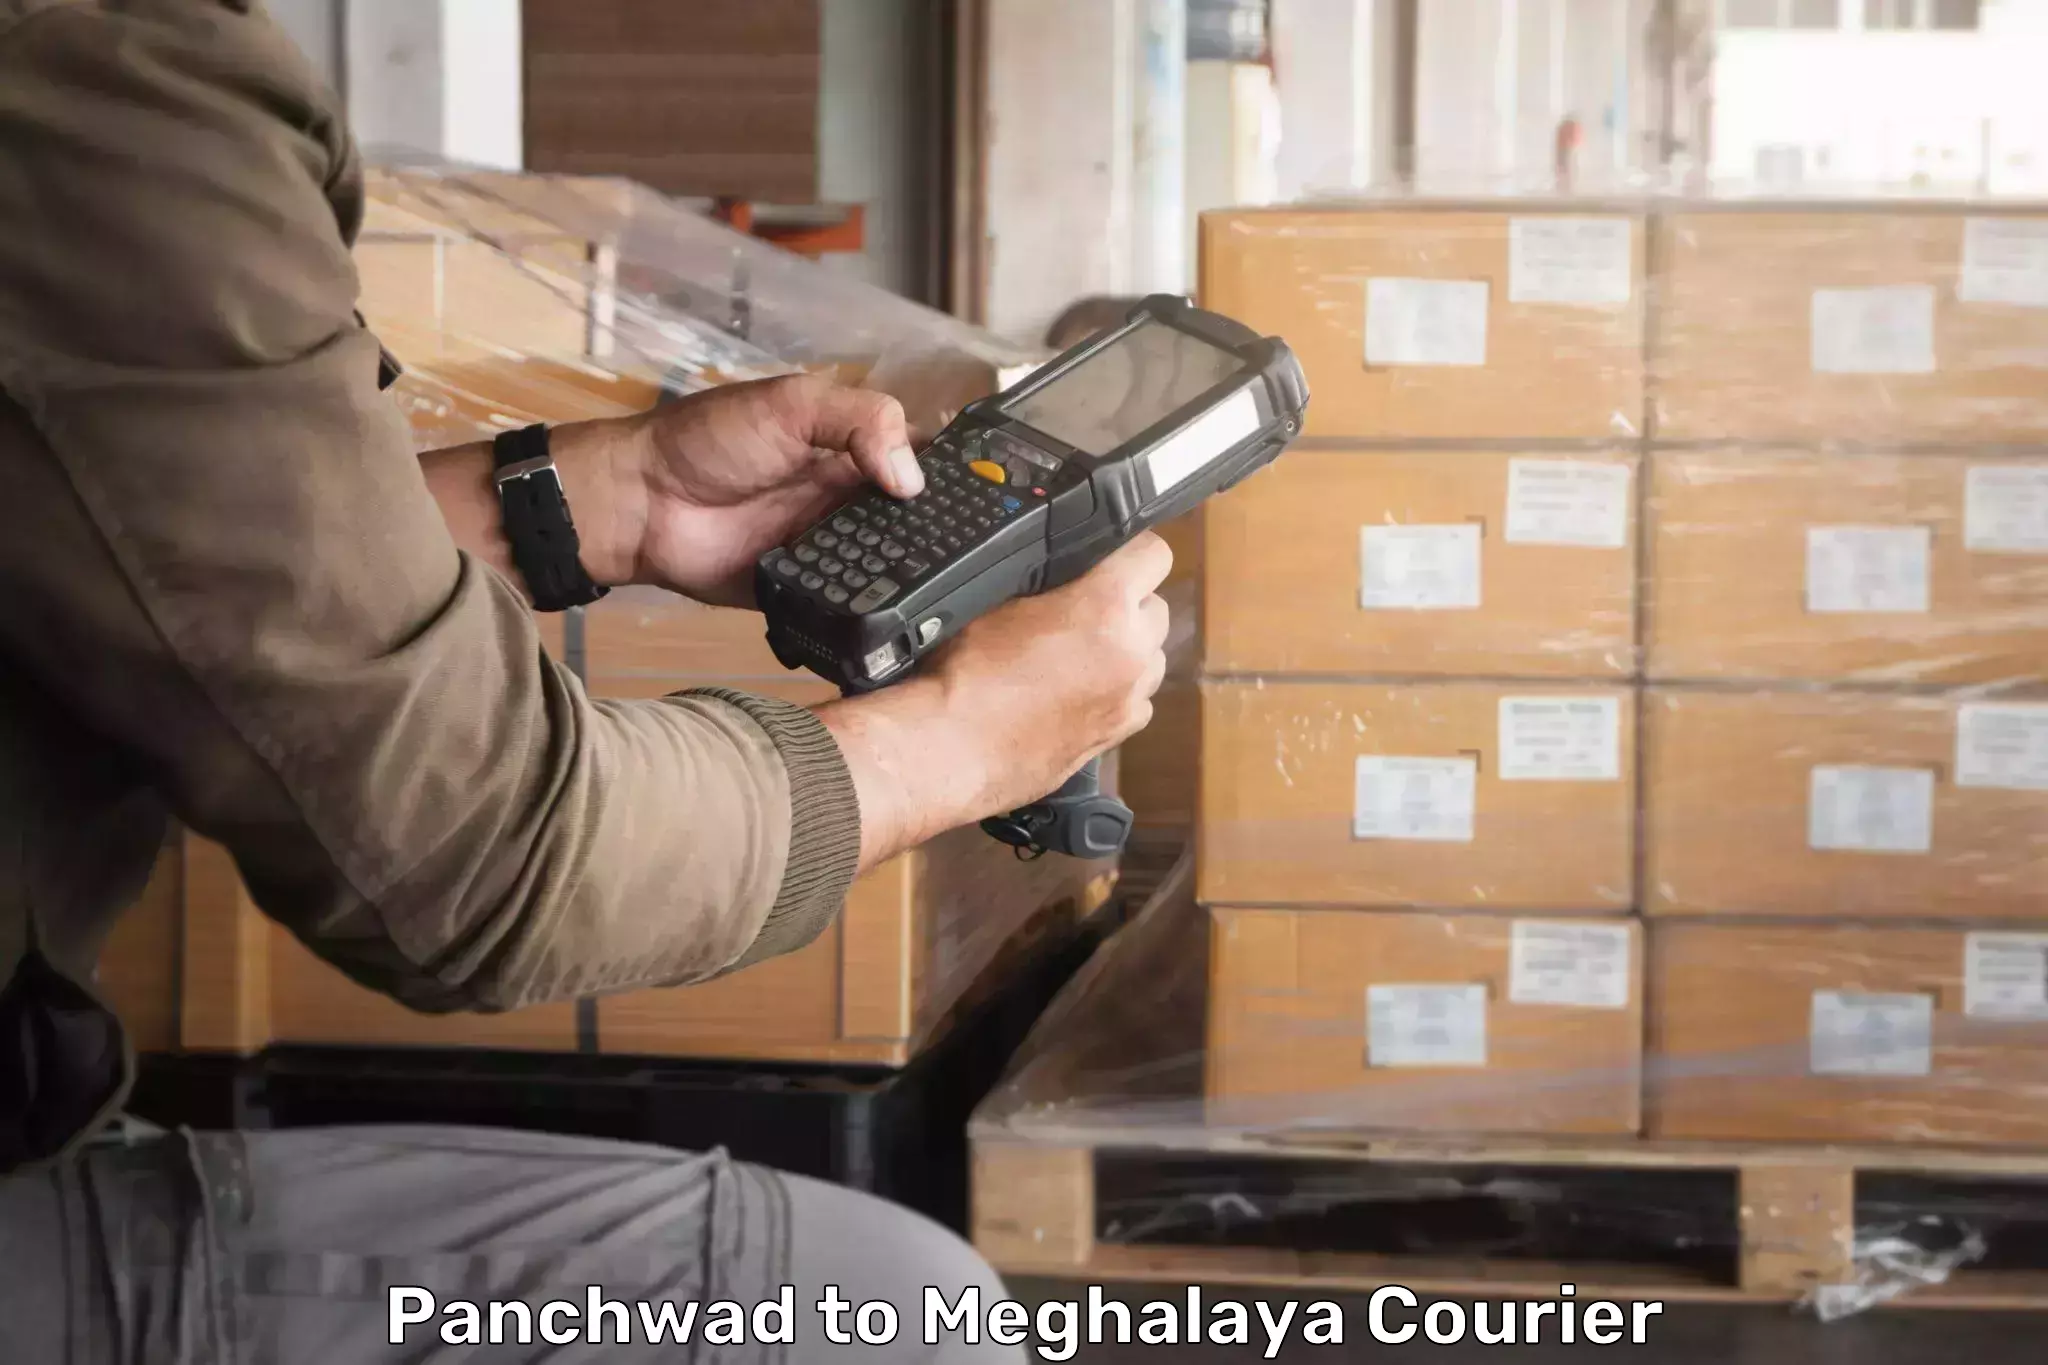 Full-service courier options Panchwad to Meghalaya